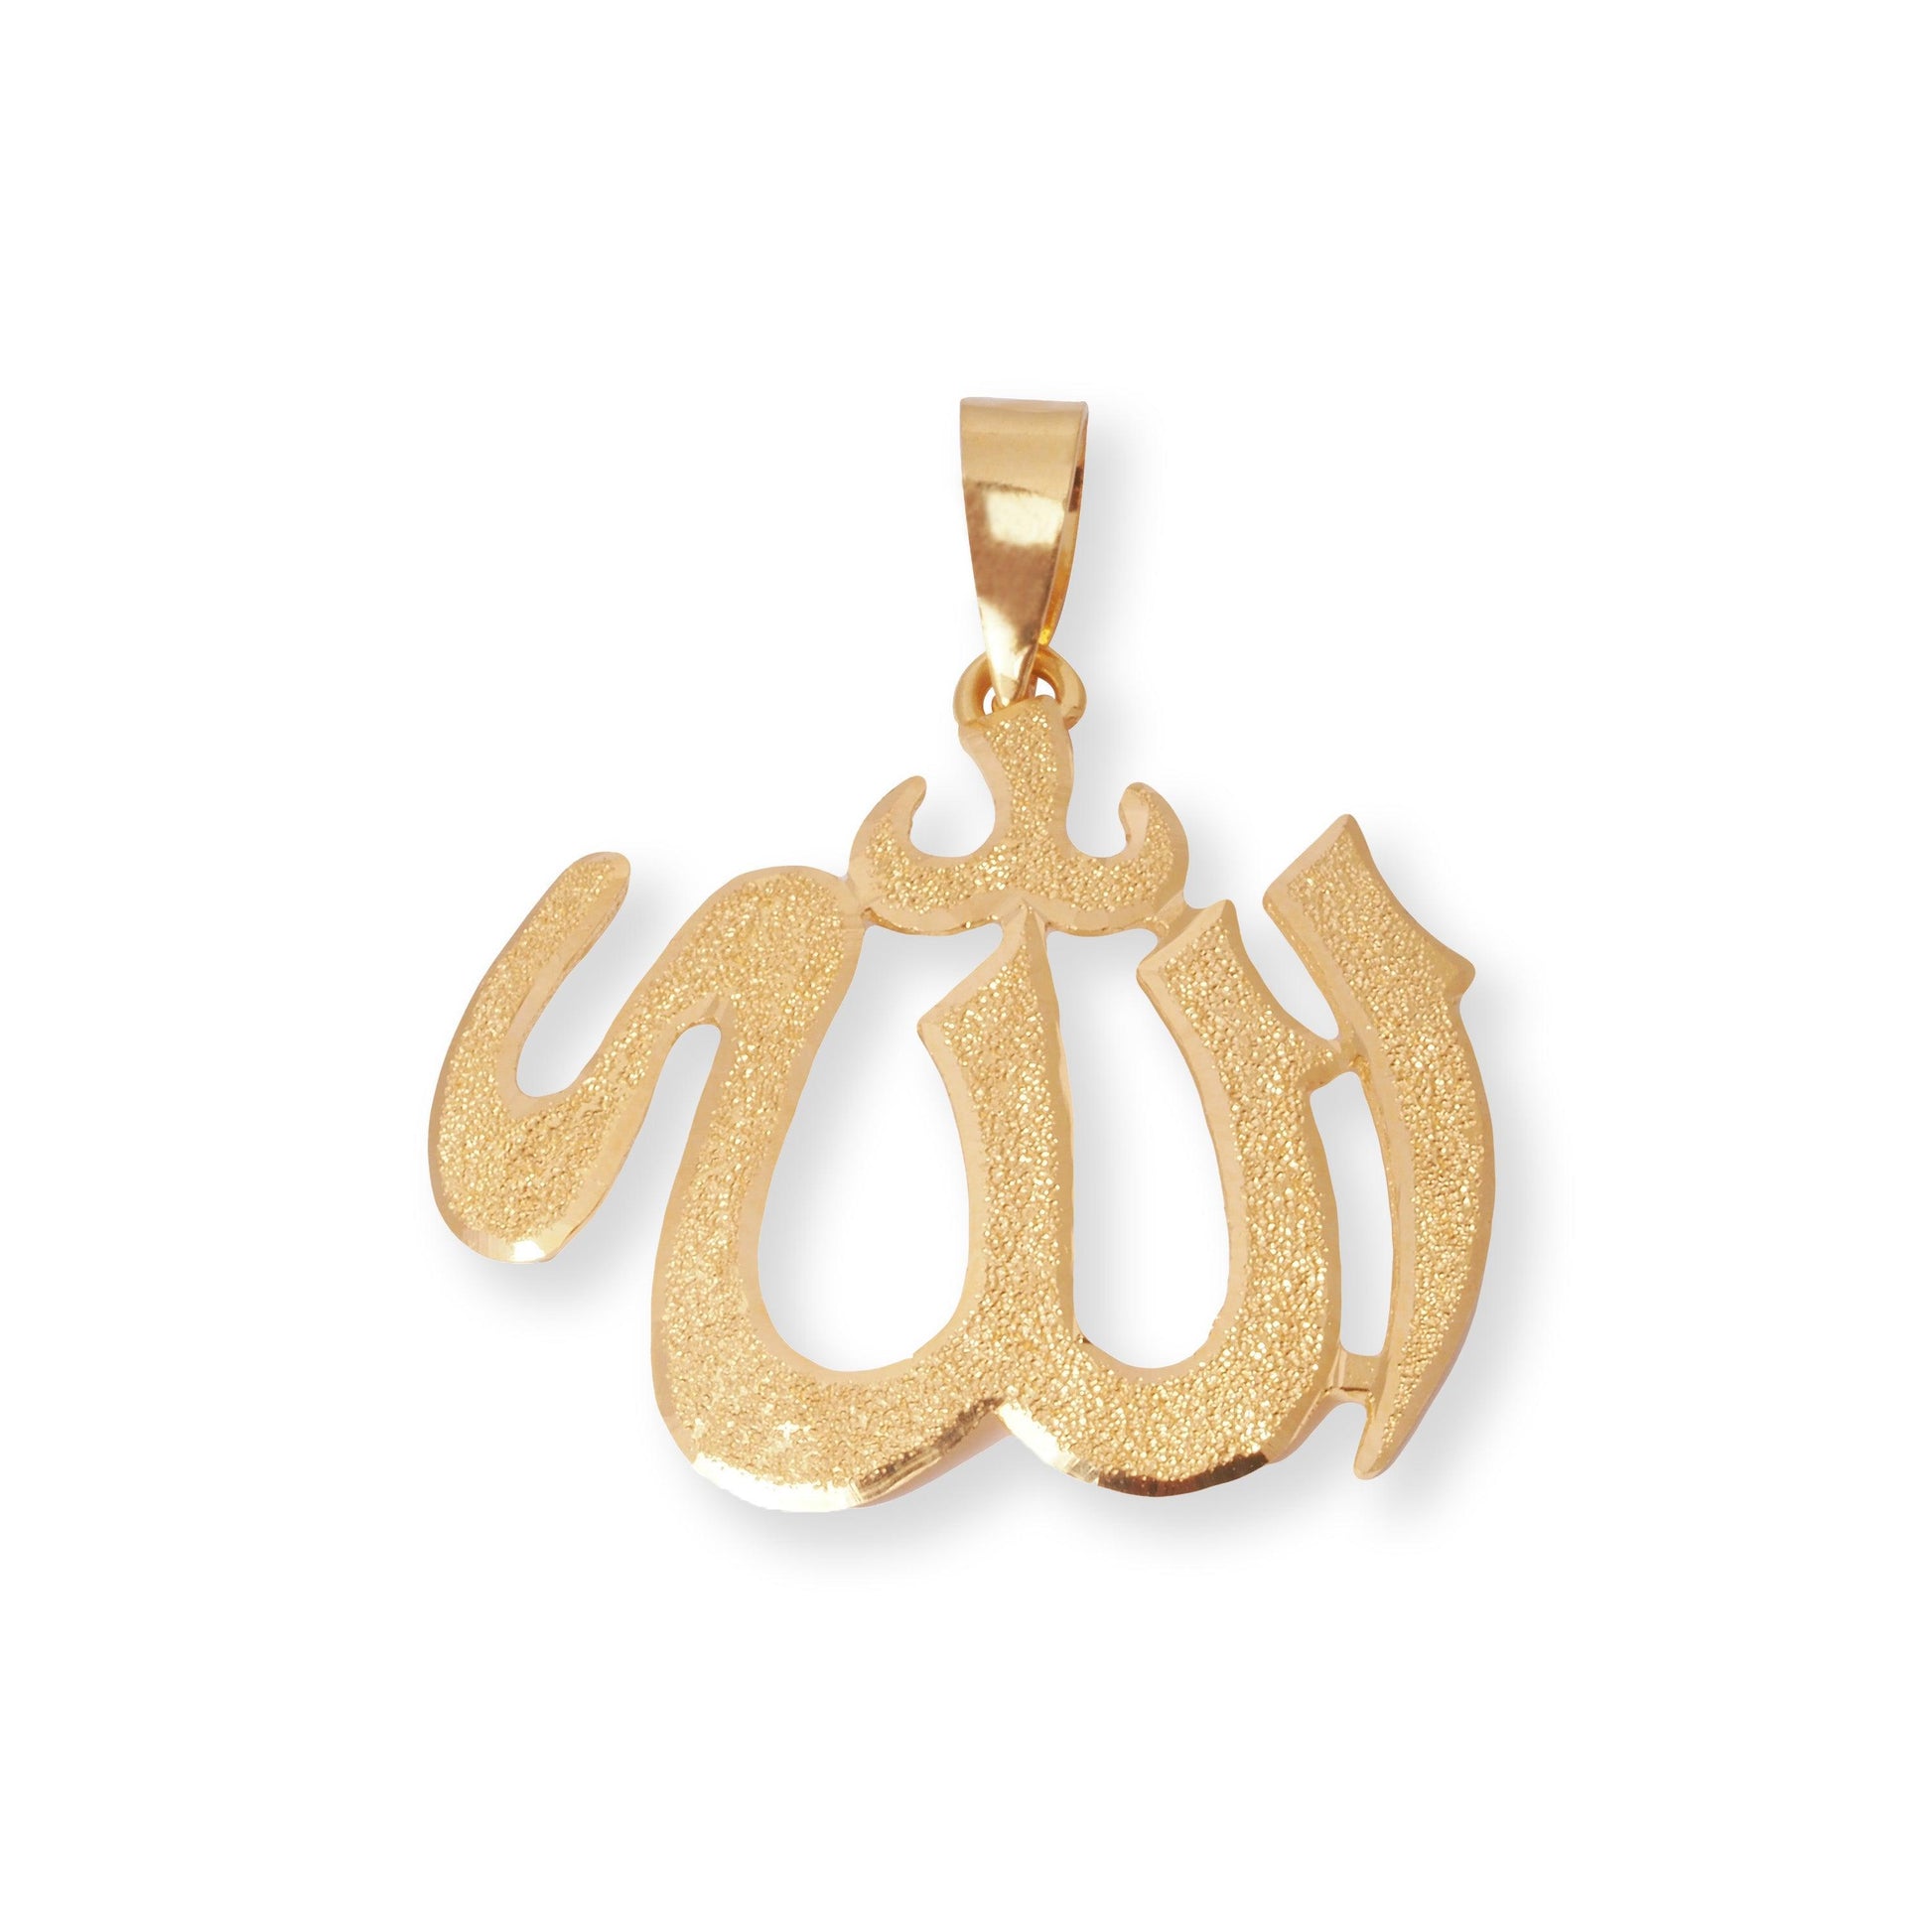 22ct Yellow Gold Islamic Allah Pendant with Brushed Finish P-7977 - Minar Jewellers